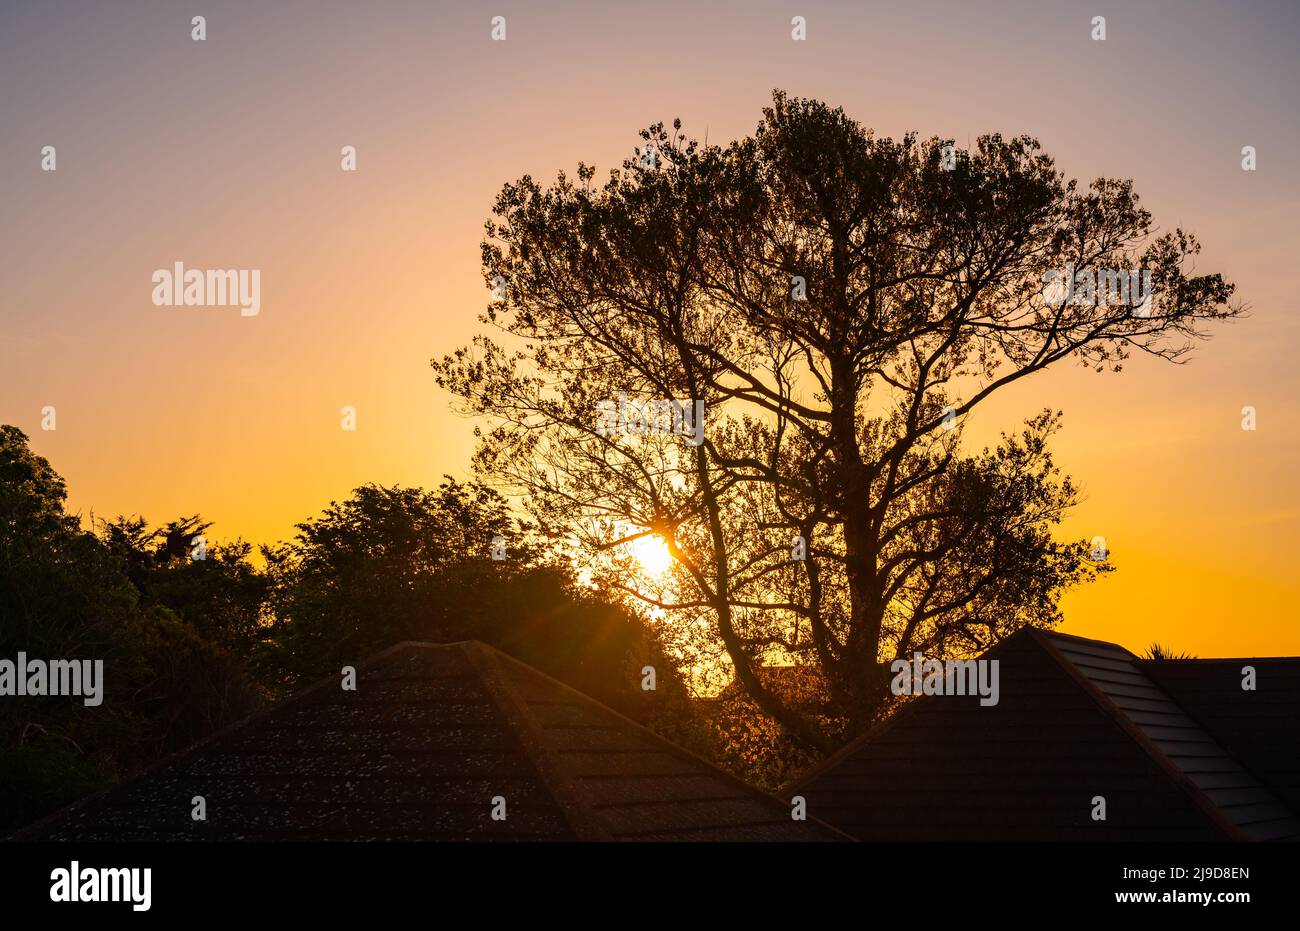 Morning sunrise or dawn sunrise through trees with house rooftops on a clear Spring morning in West Sussex, England, UK. Sun rising in Spring. Stock Photo